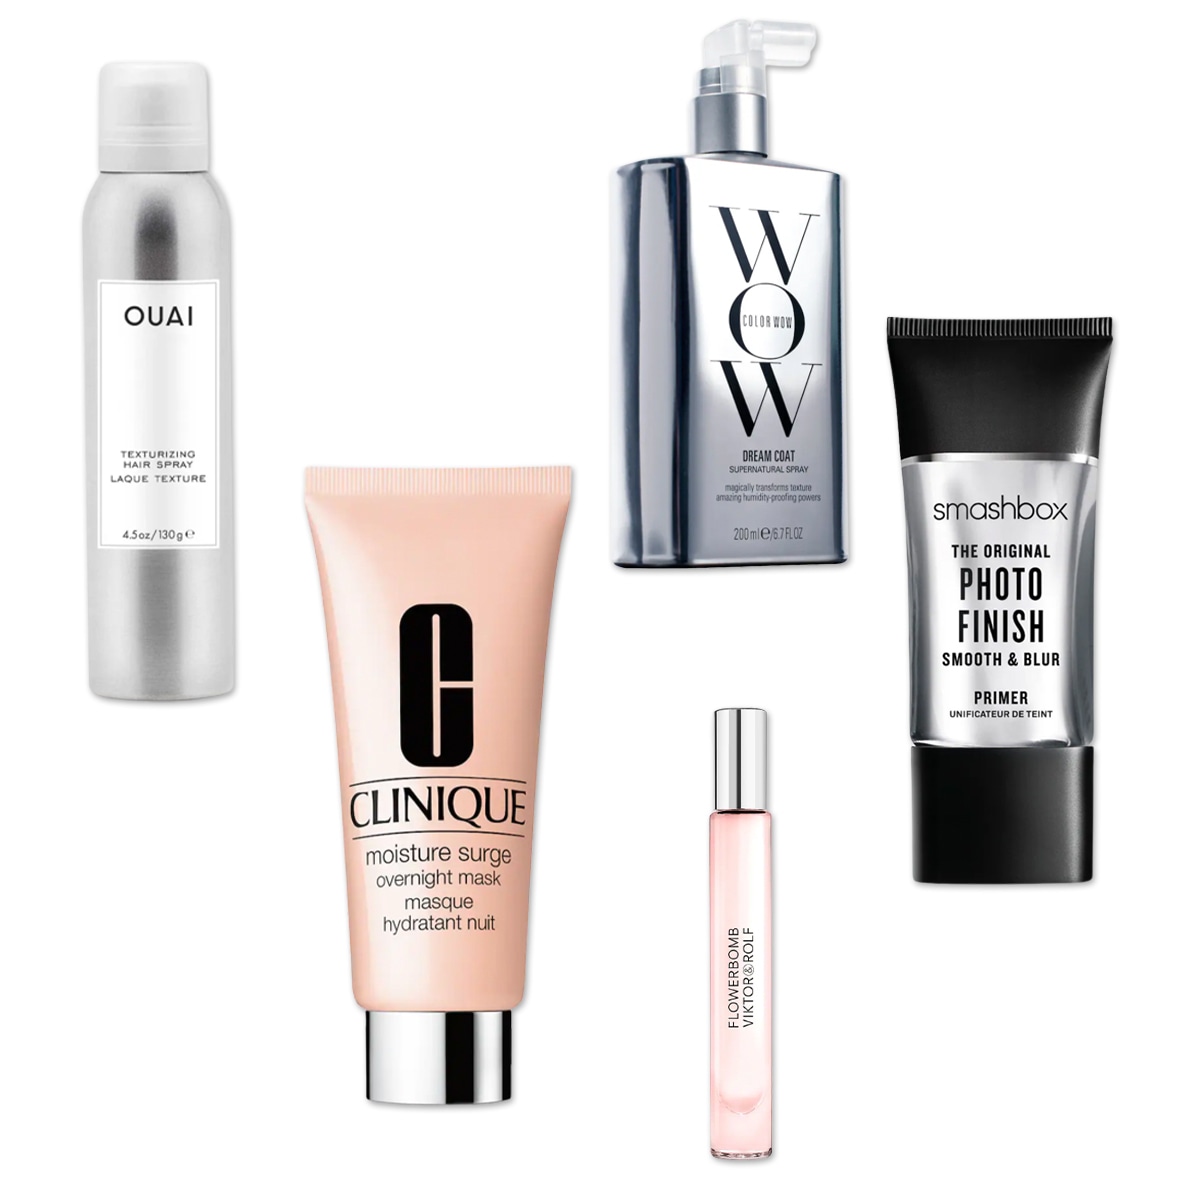 https://akns-images.eonline.com/eol_images/Entire_Site/2023313/rs_1200x1200-230413151317-Sephora-Sale.jpg?fit=around%7C1200:1200&output-quality=90&crop=1200:1200;center,top